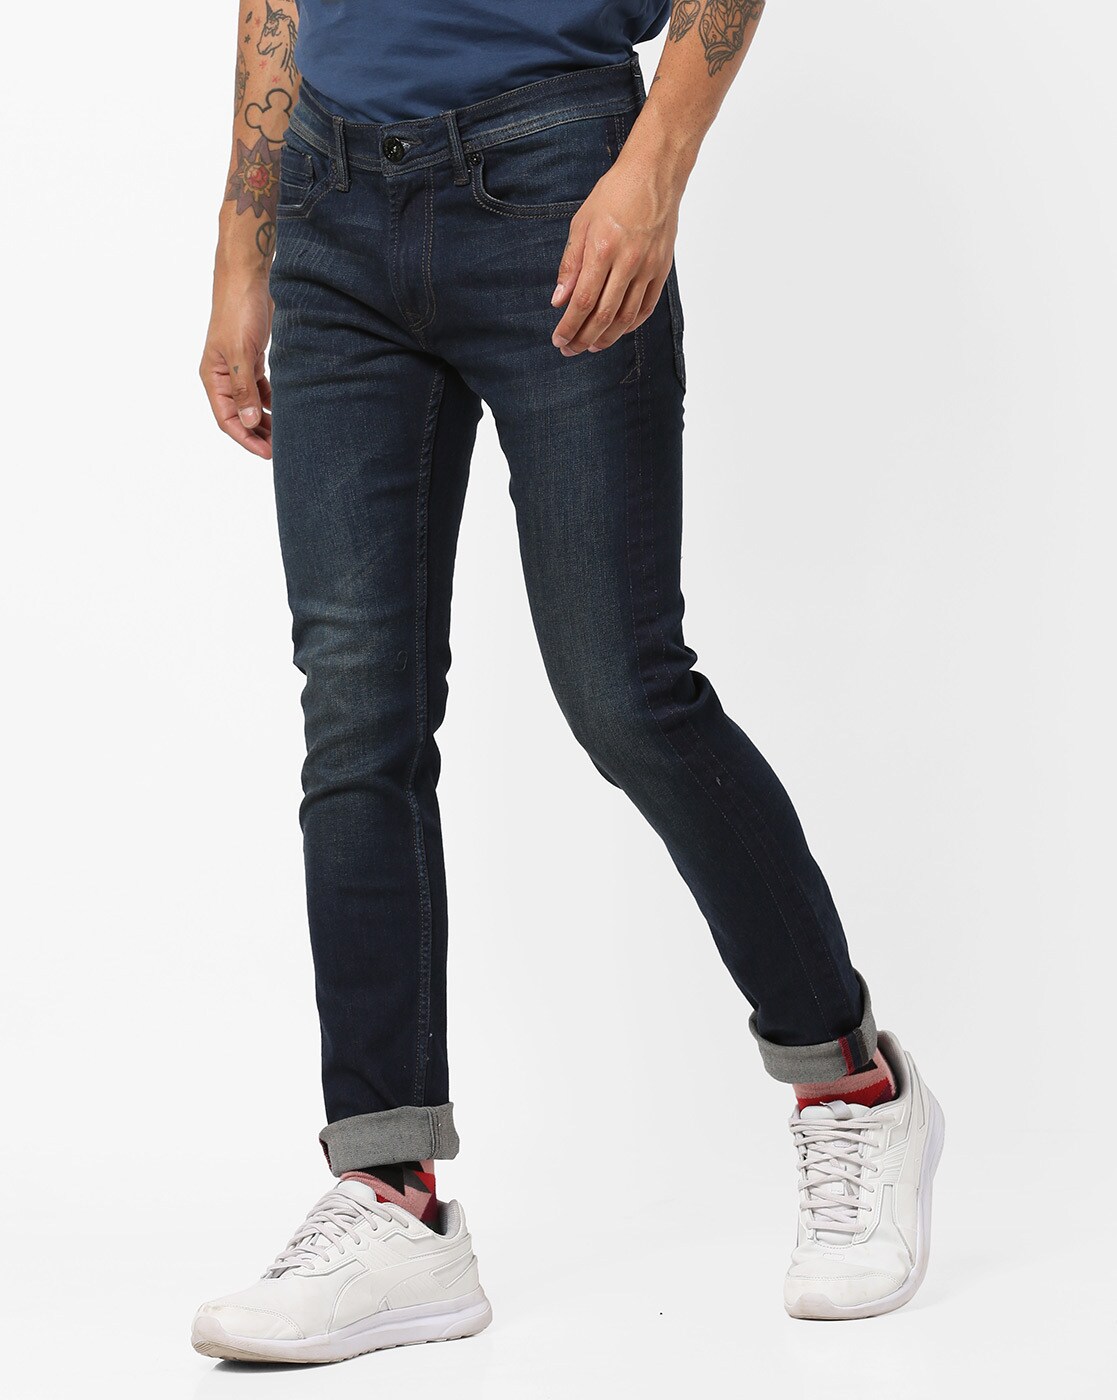 pepe jeans shoes online store